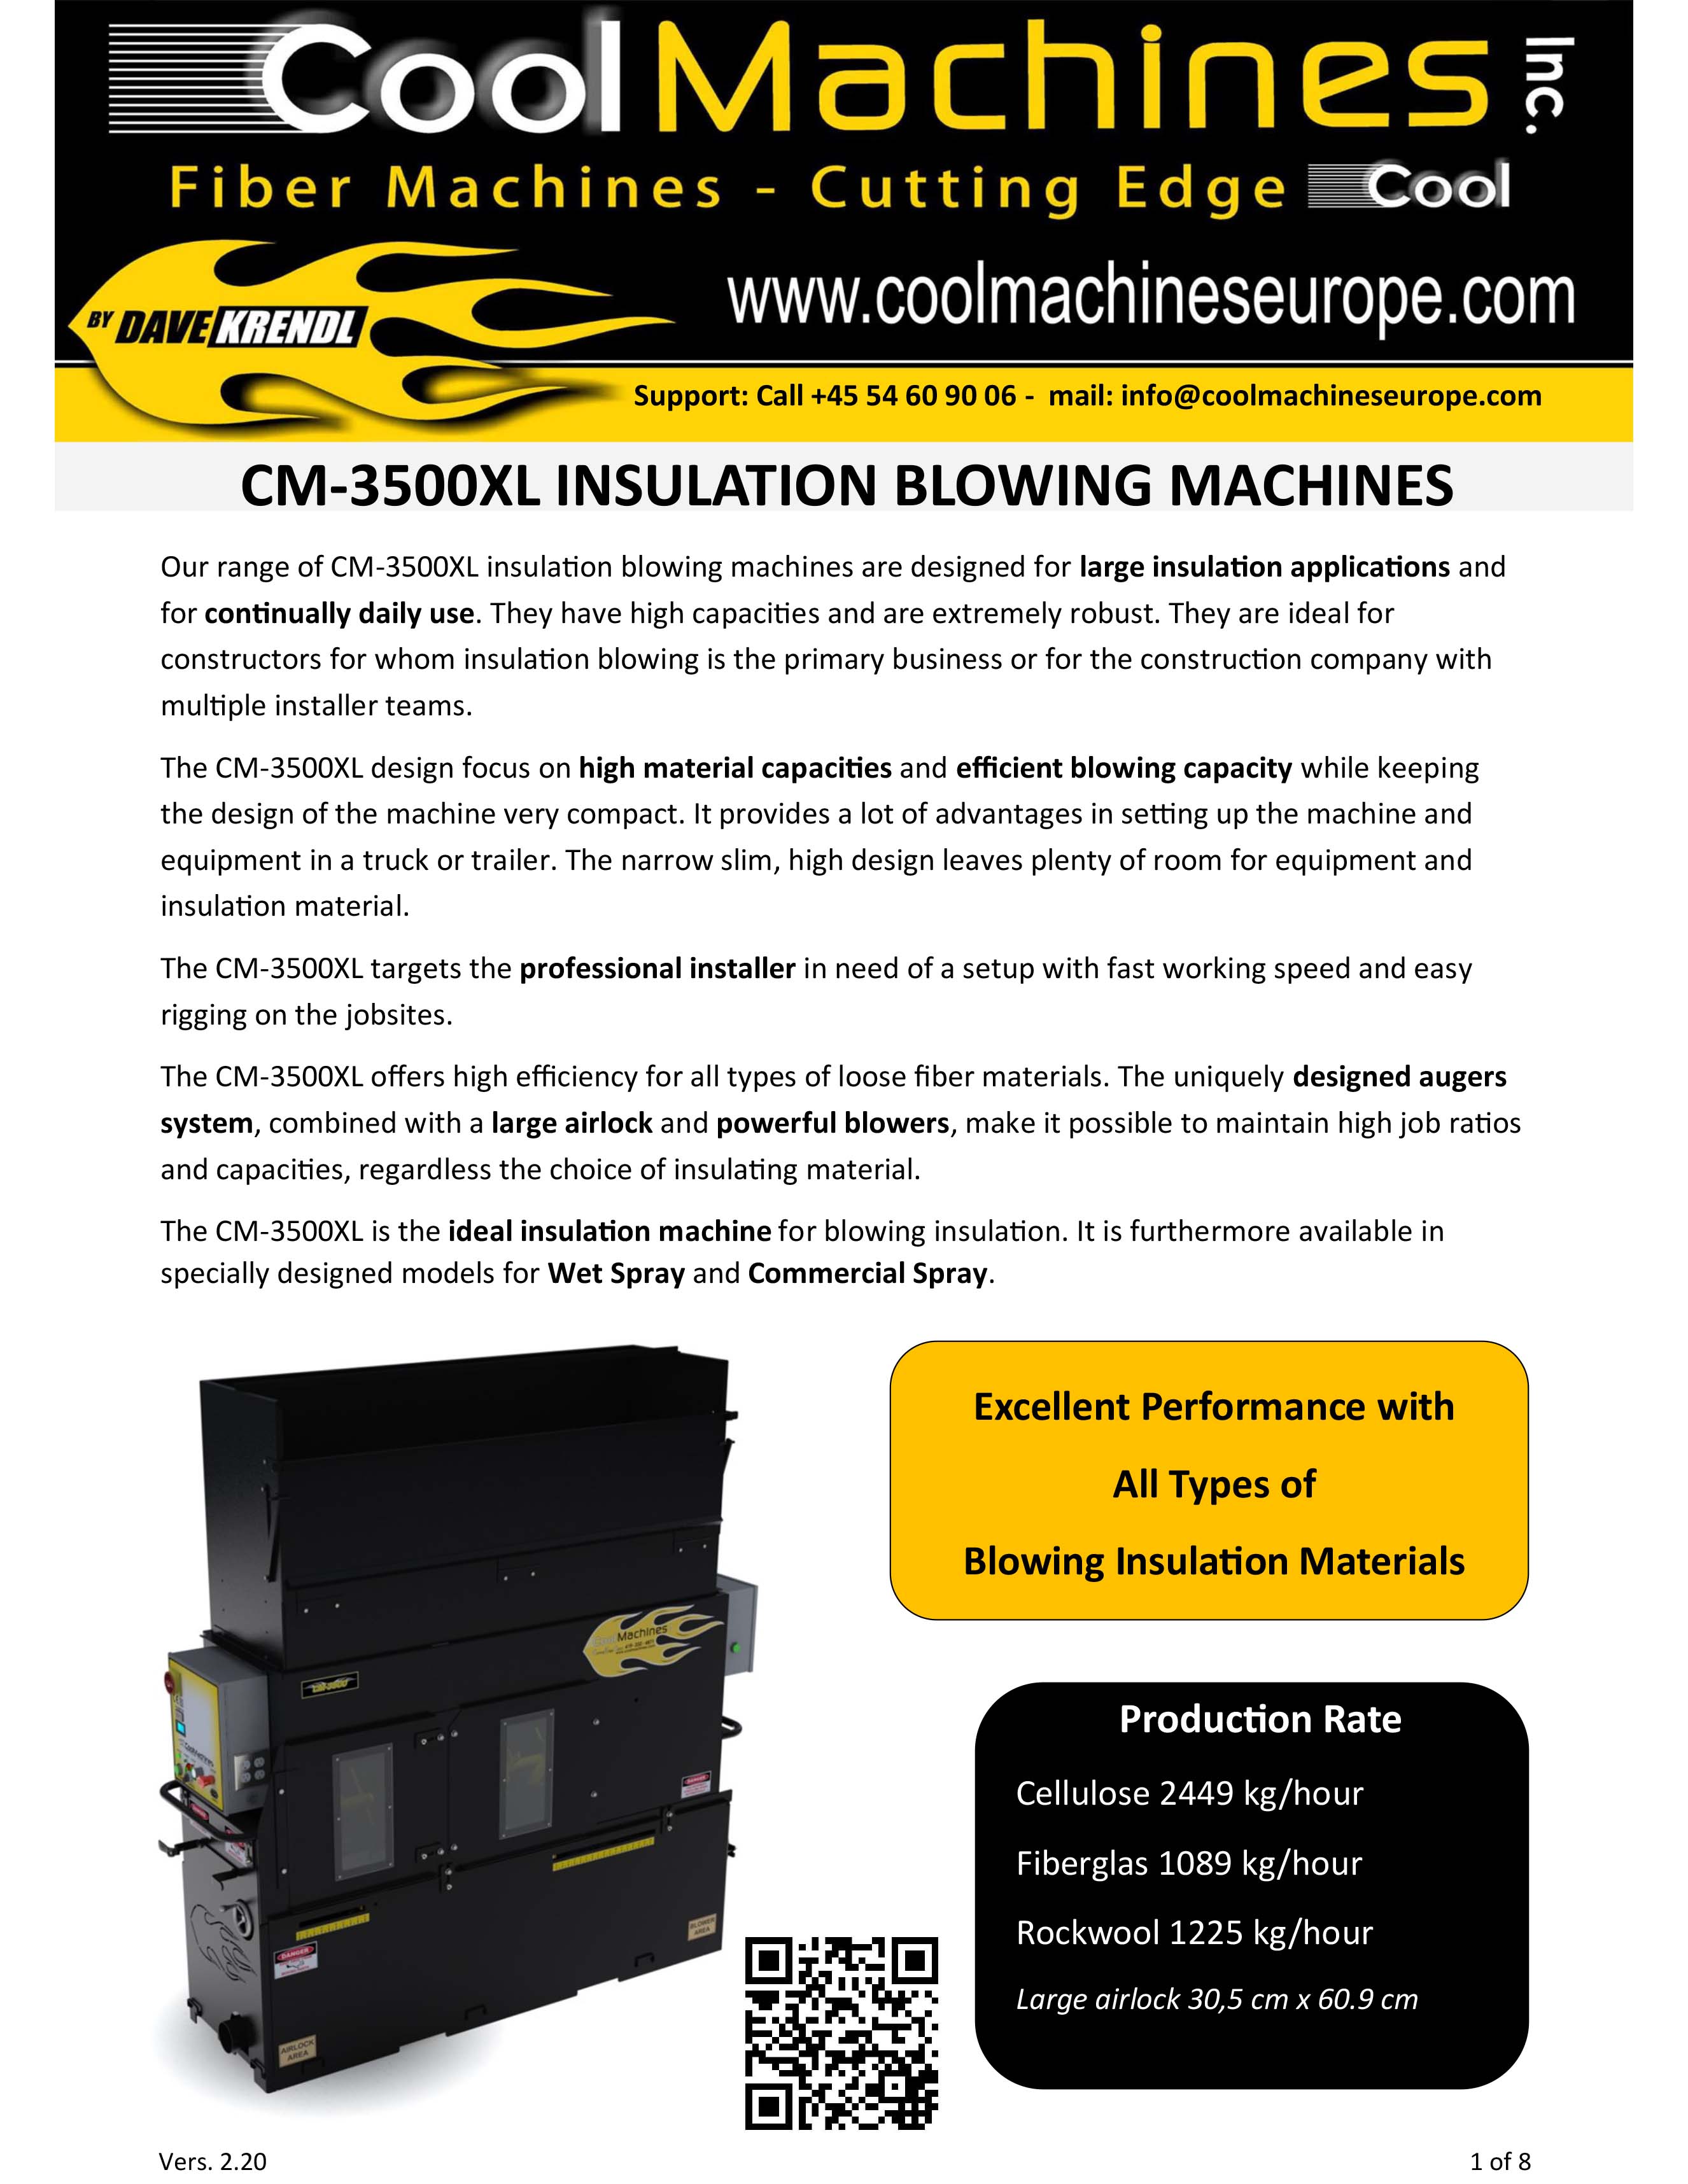 CM-3500XL Insulations Blowing Machines